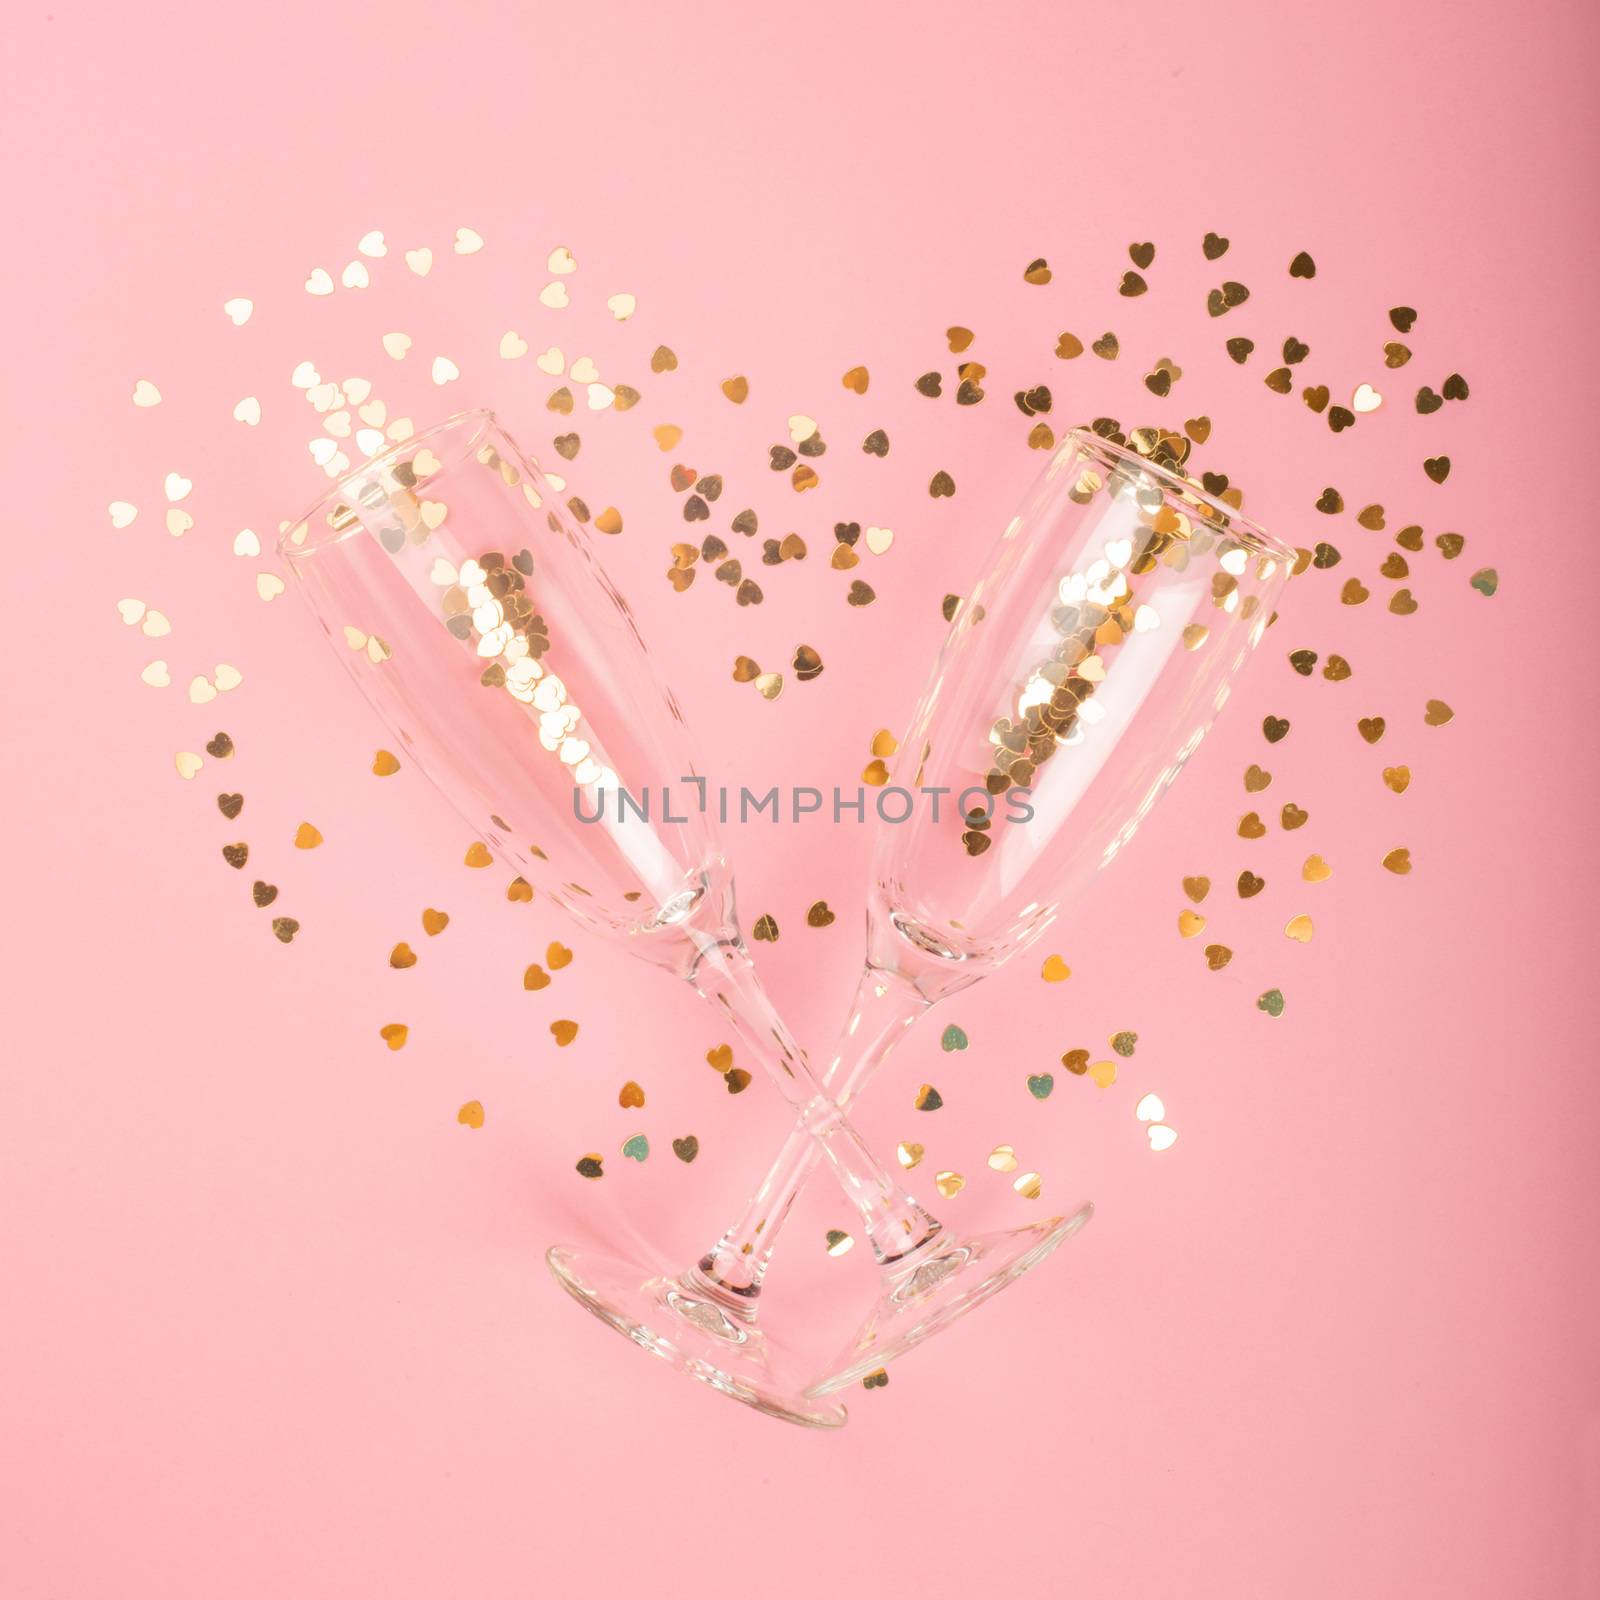 Valentines day champagne flutes glasses and heart shaped golden glitters on pink background with copy space for text